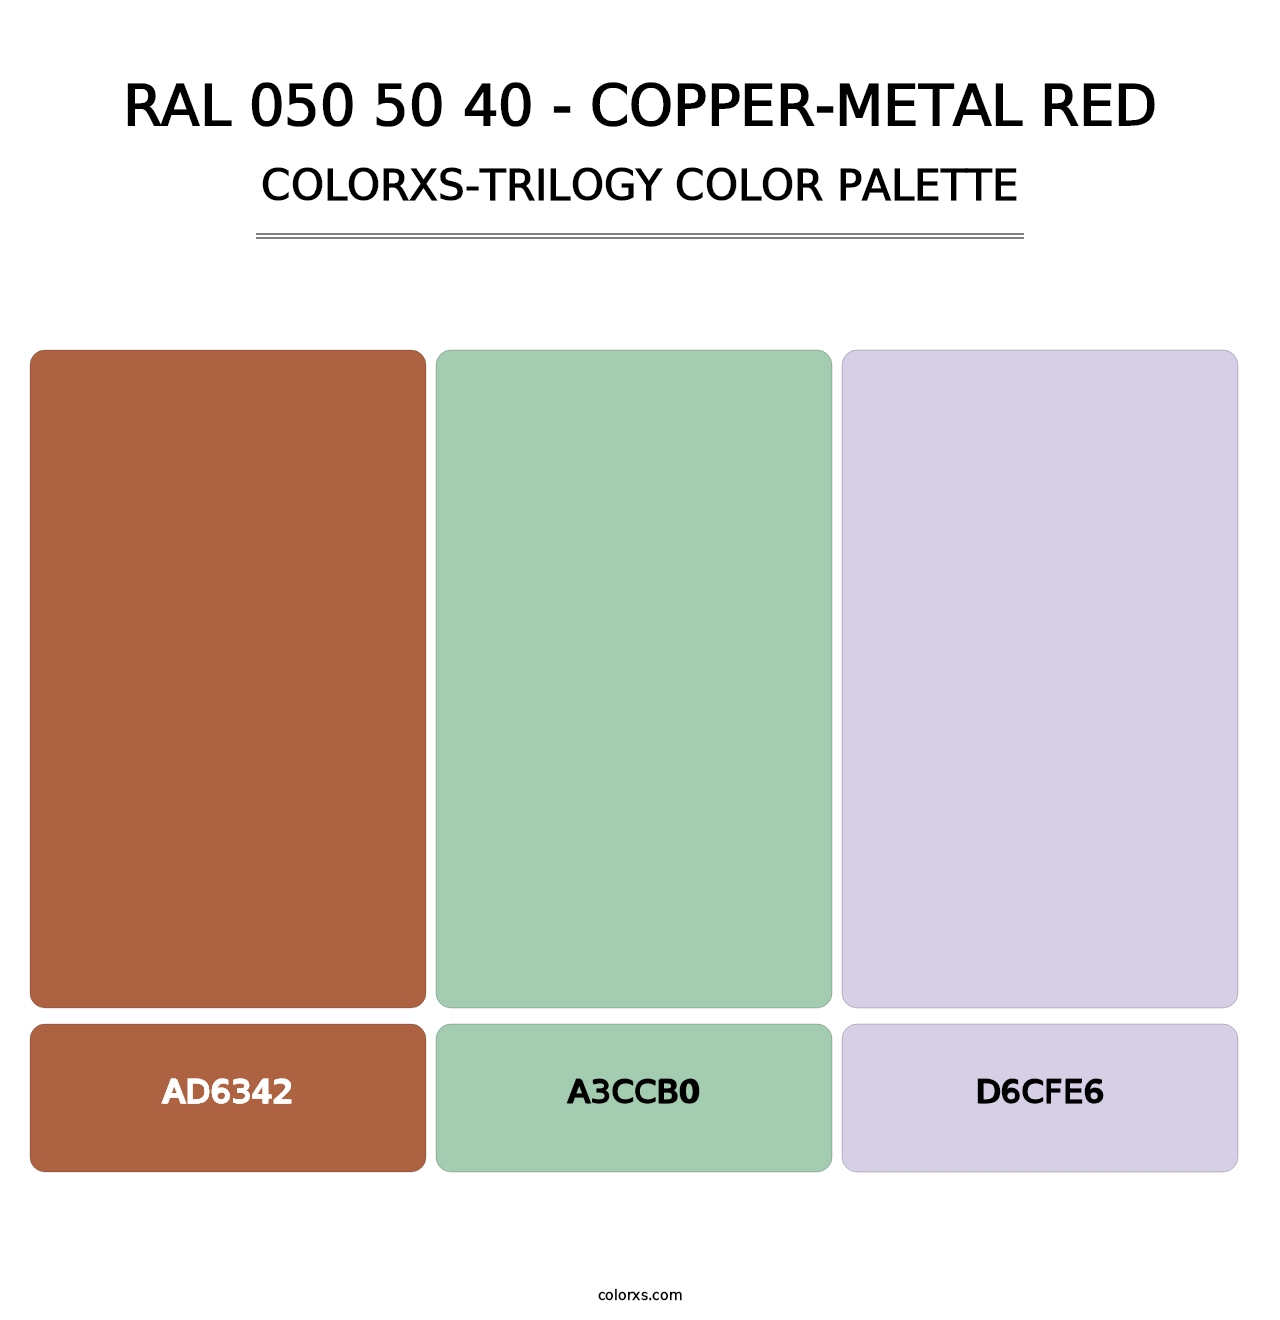 RAL 050 50 40 - Copper-Metal Red - Colorxs Trilogy Palette